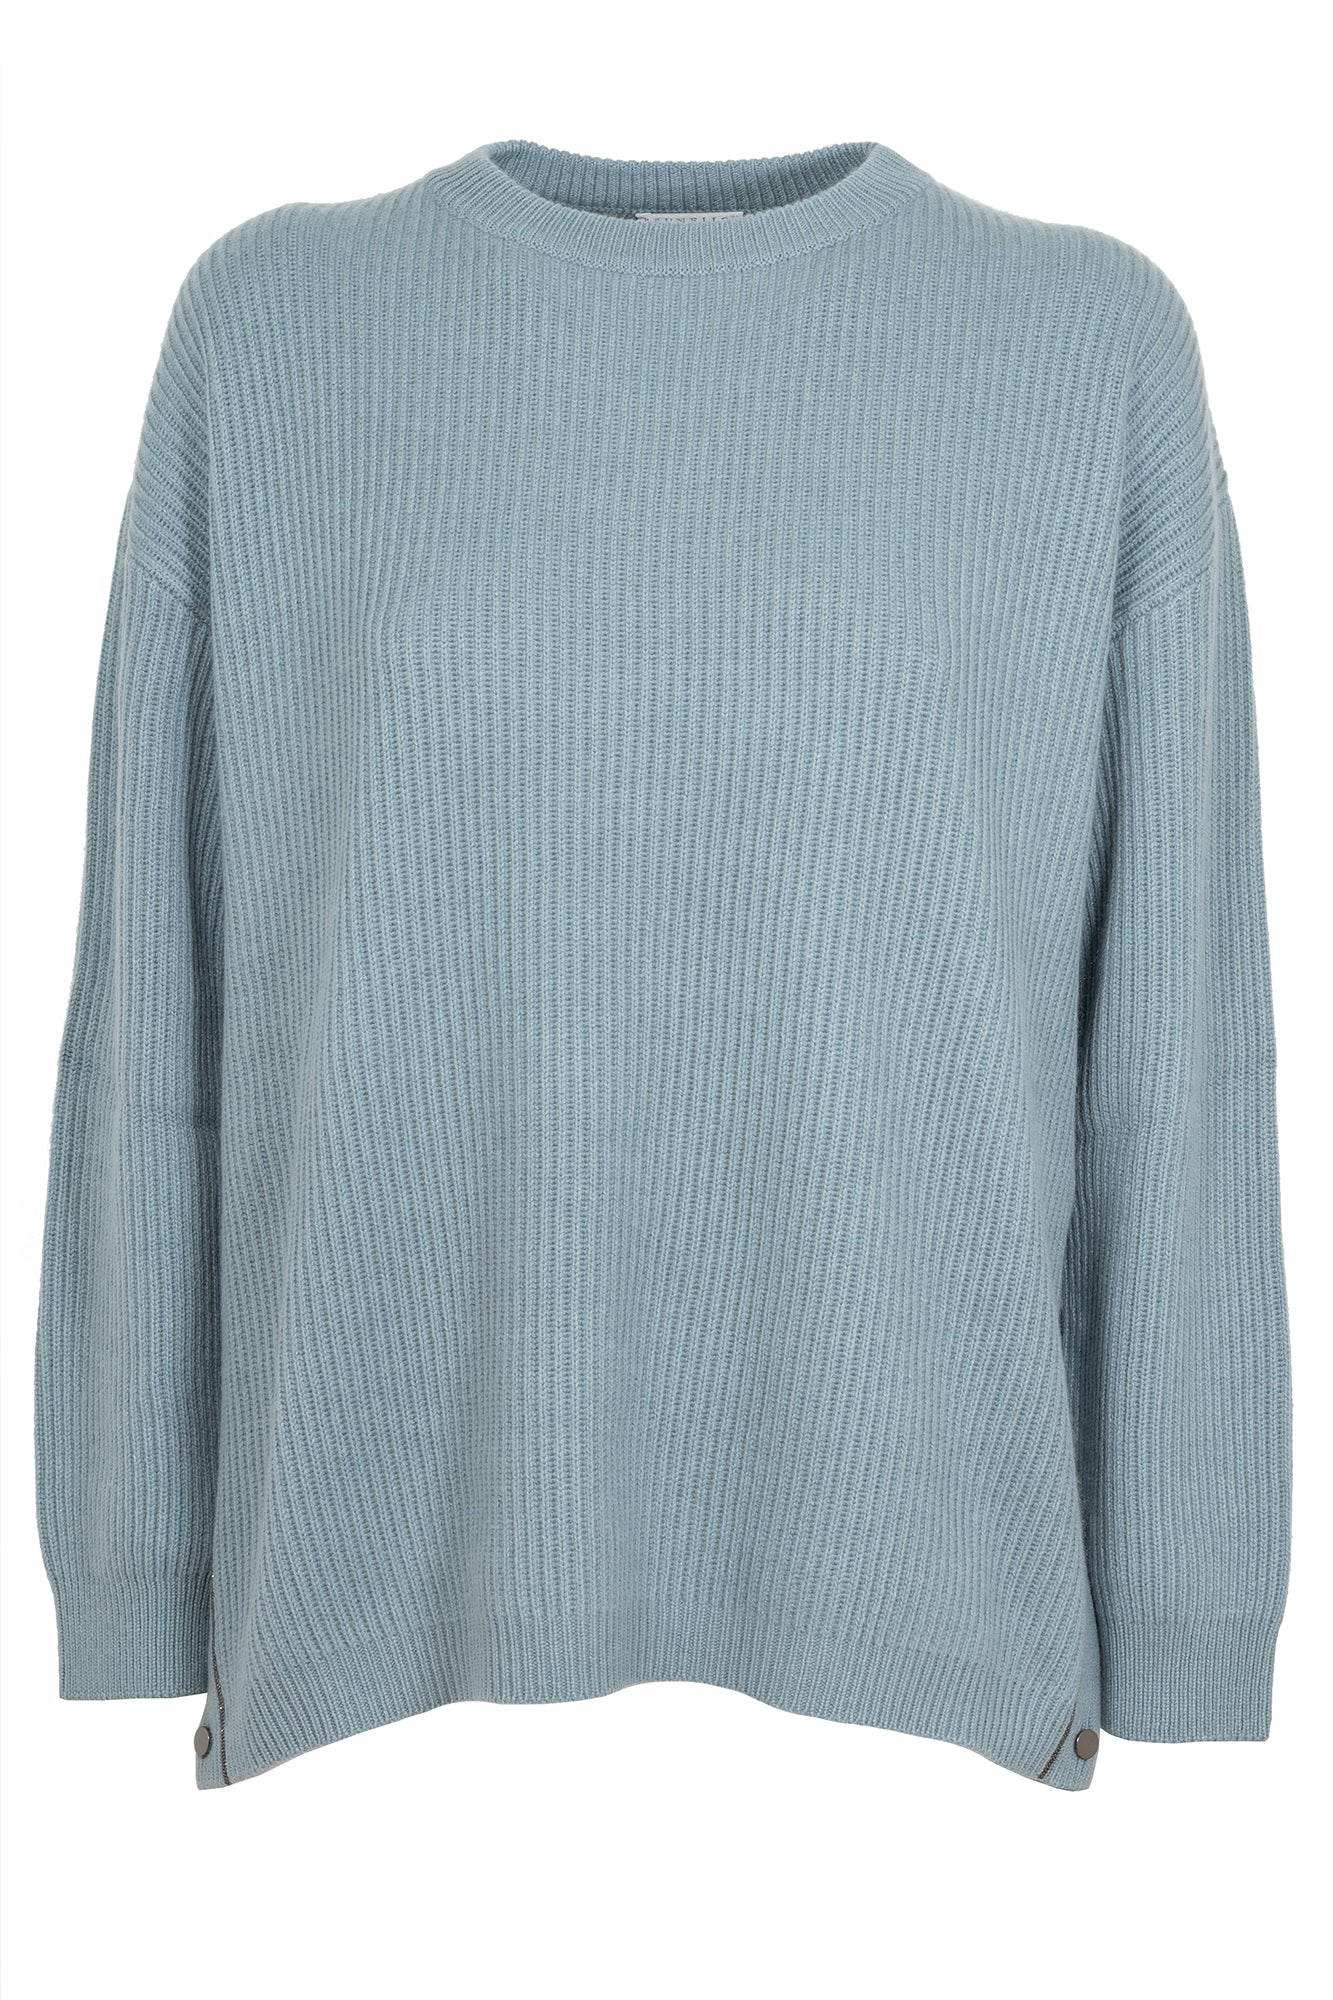 English rib cashmere sweater with side button detail